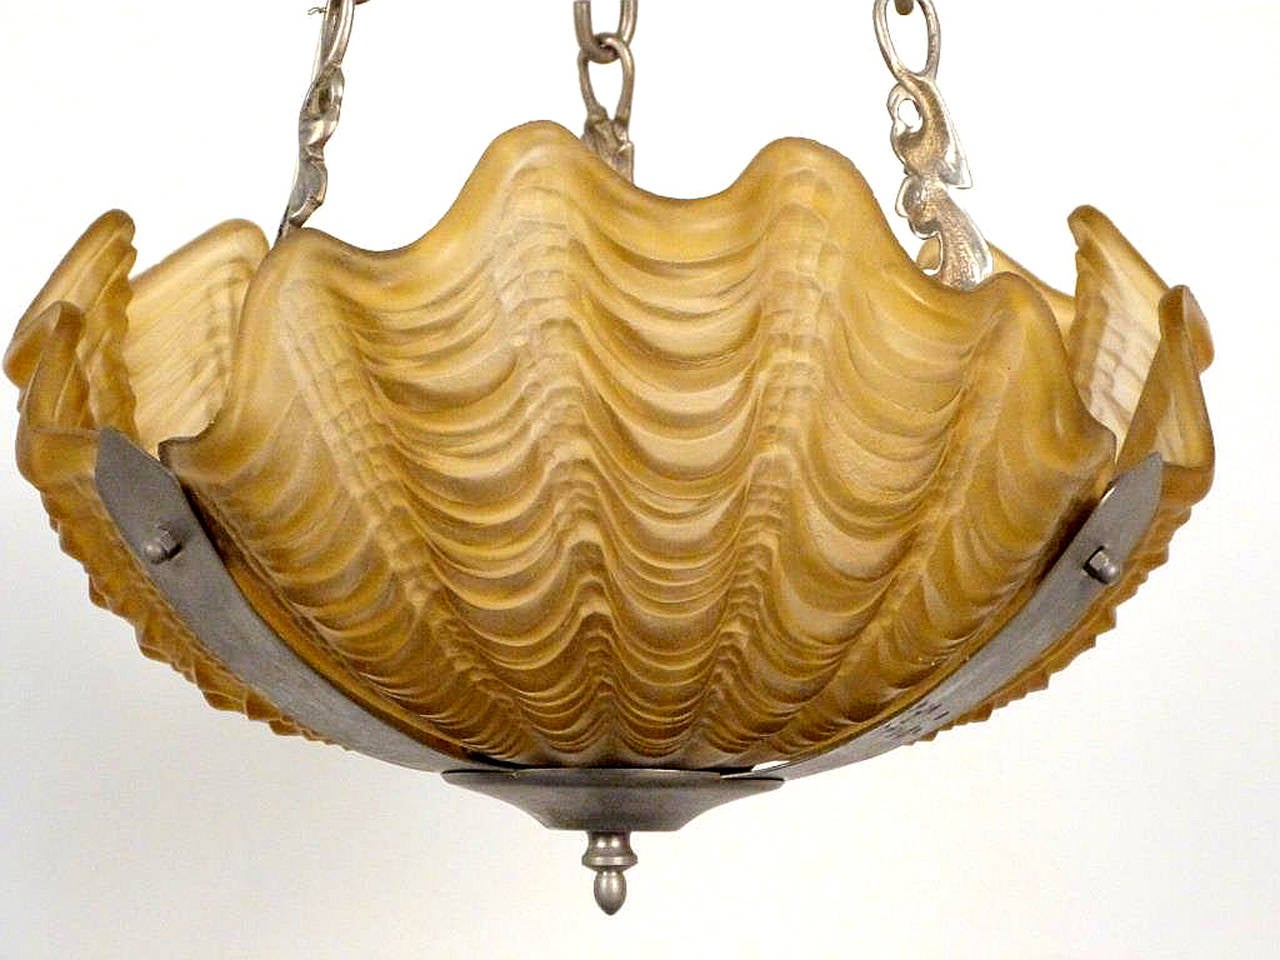 Great form and size.  Pressed amber glass giant clam shells along with Chromed chains.
Perfect for the beach house.